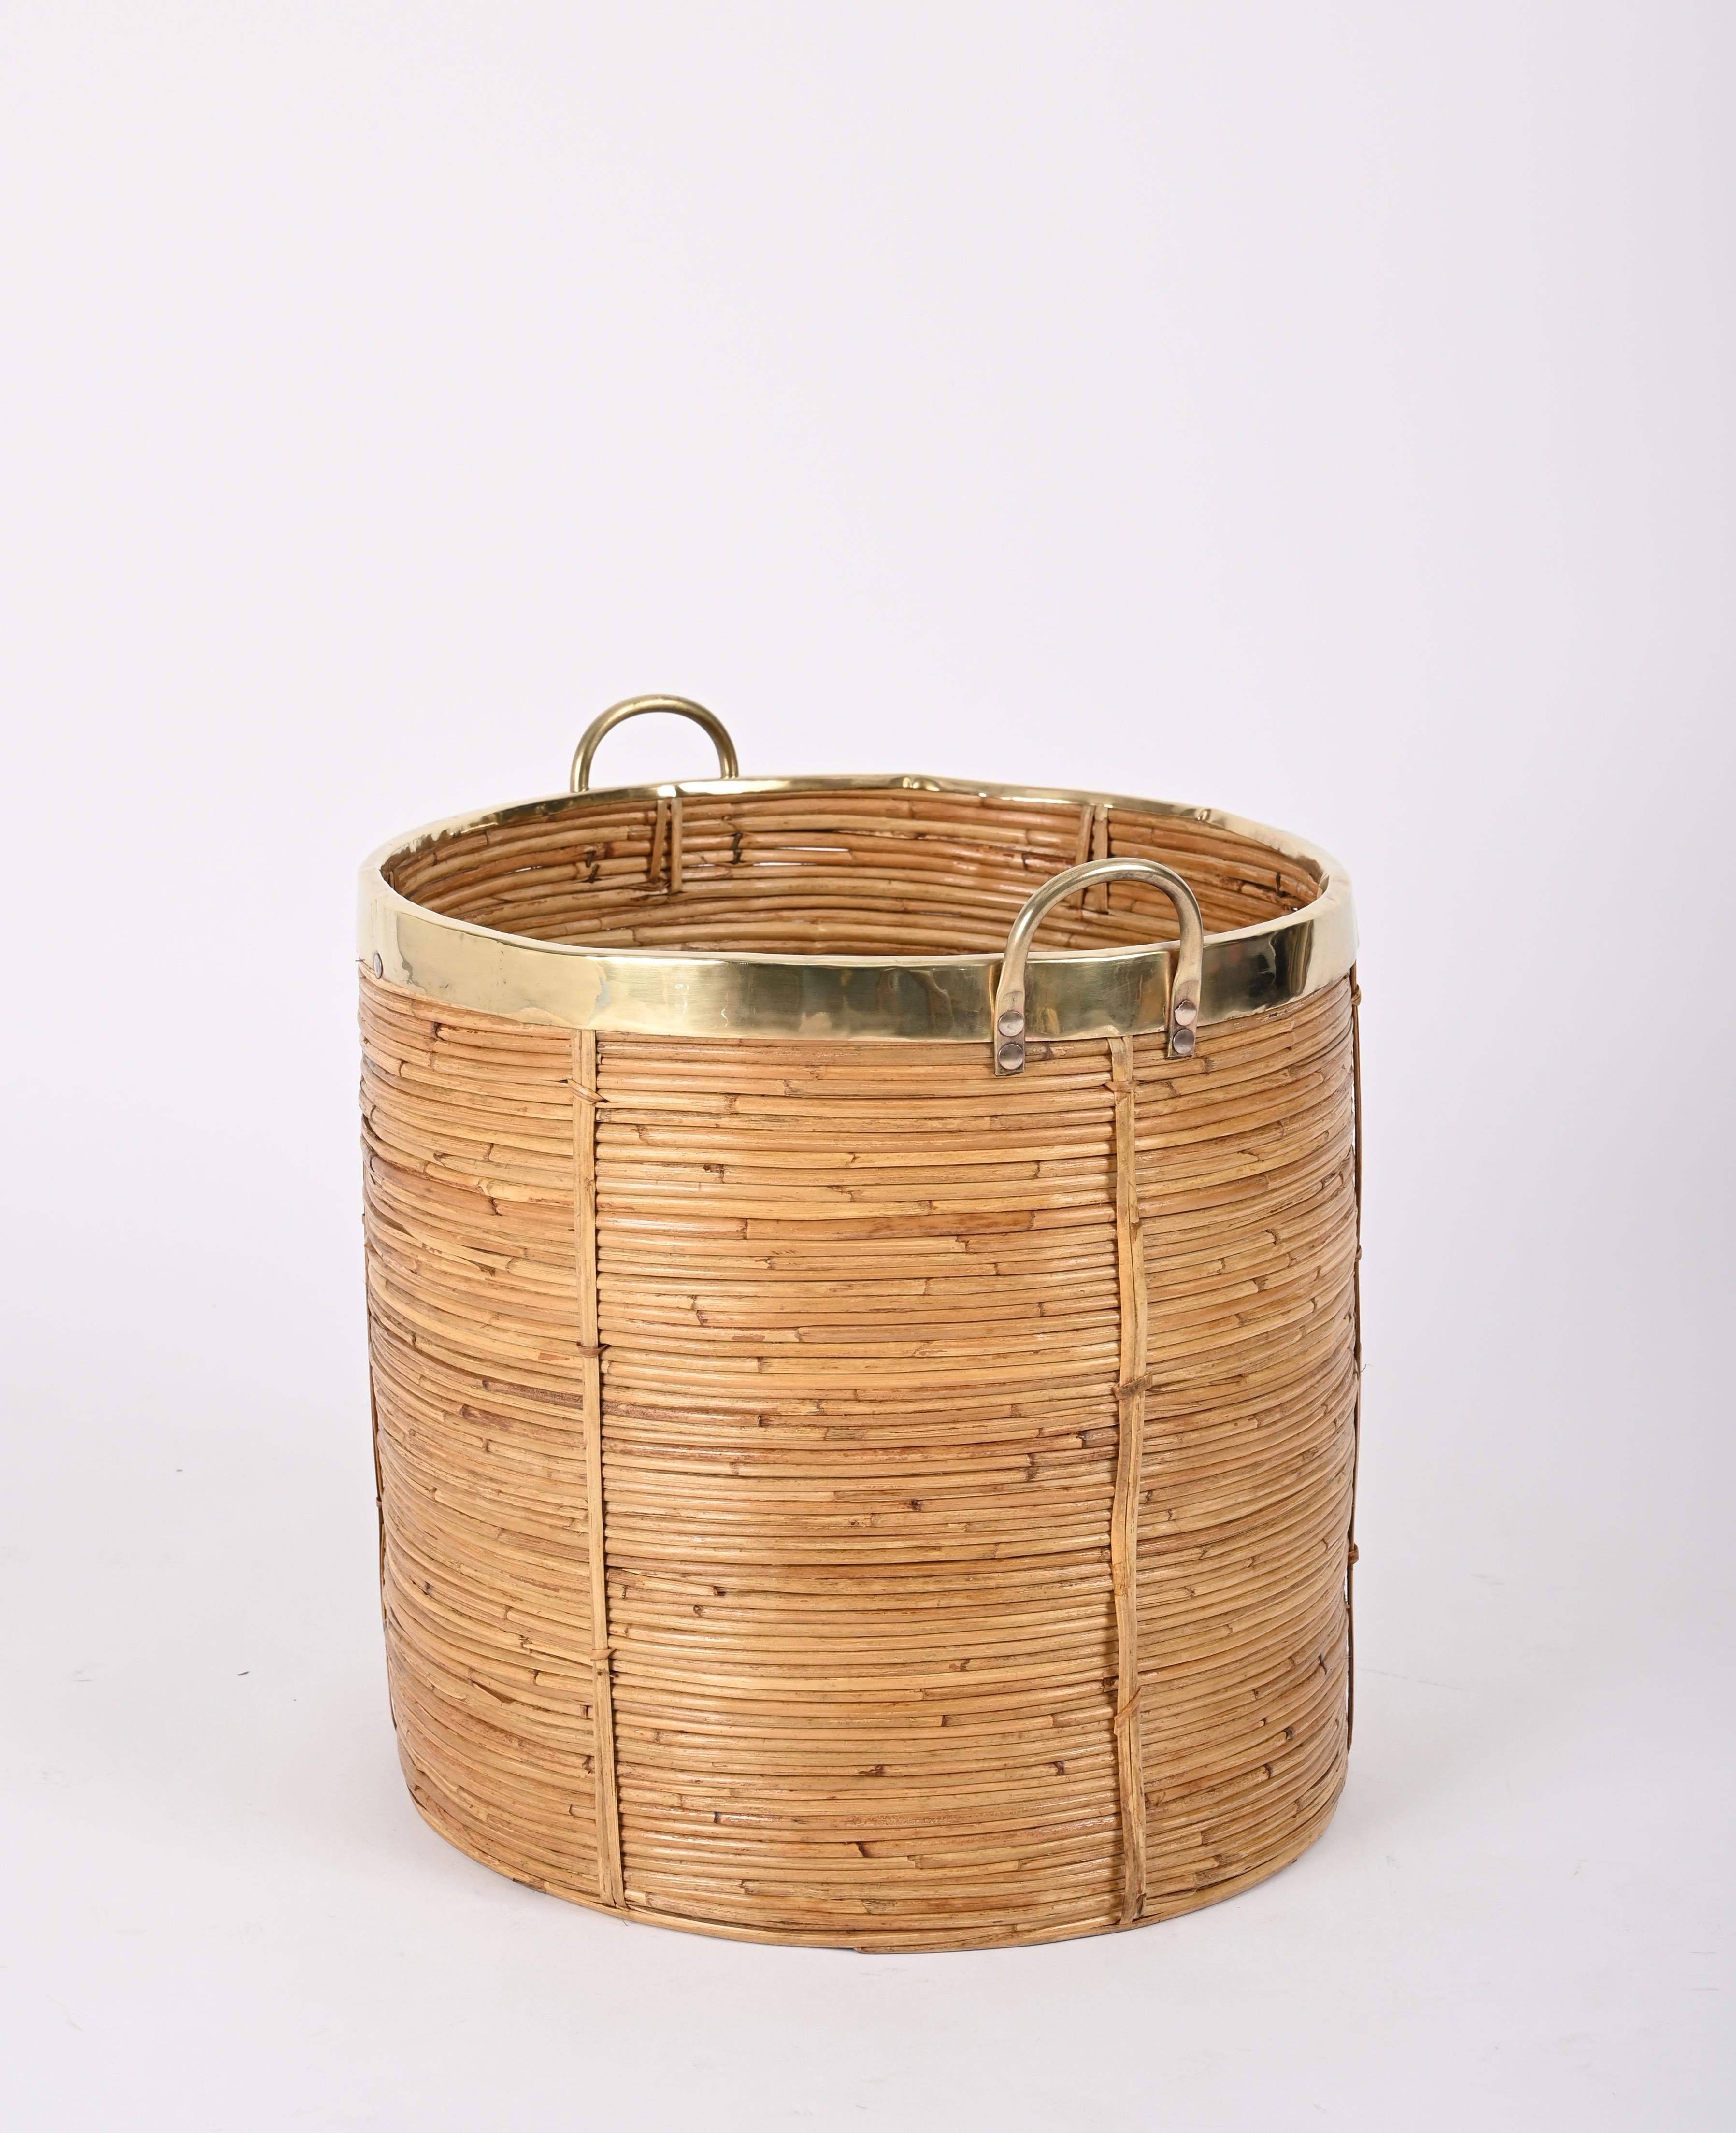 20th Century Midcentury Curved Rattan, Brass and Wicker Basket, Vivai del Sud, Italy 1970s For Sale